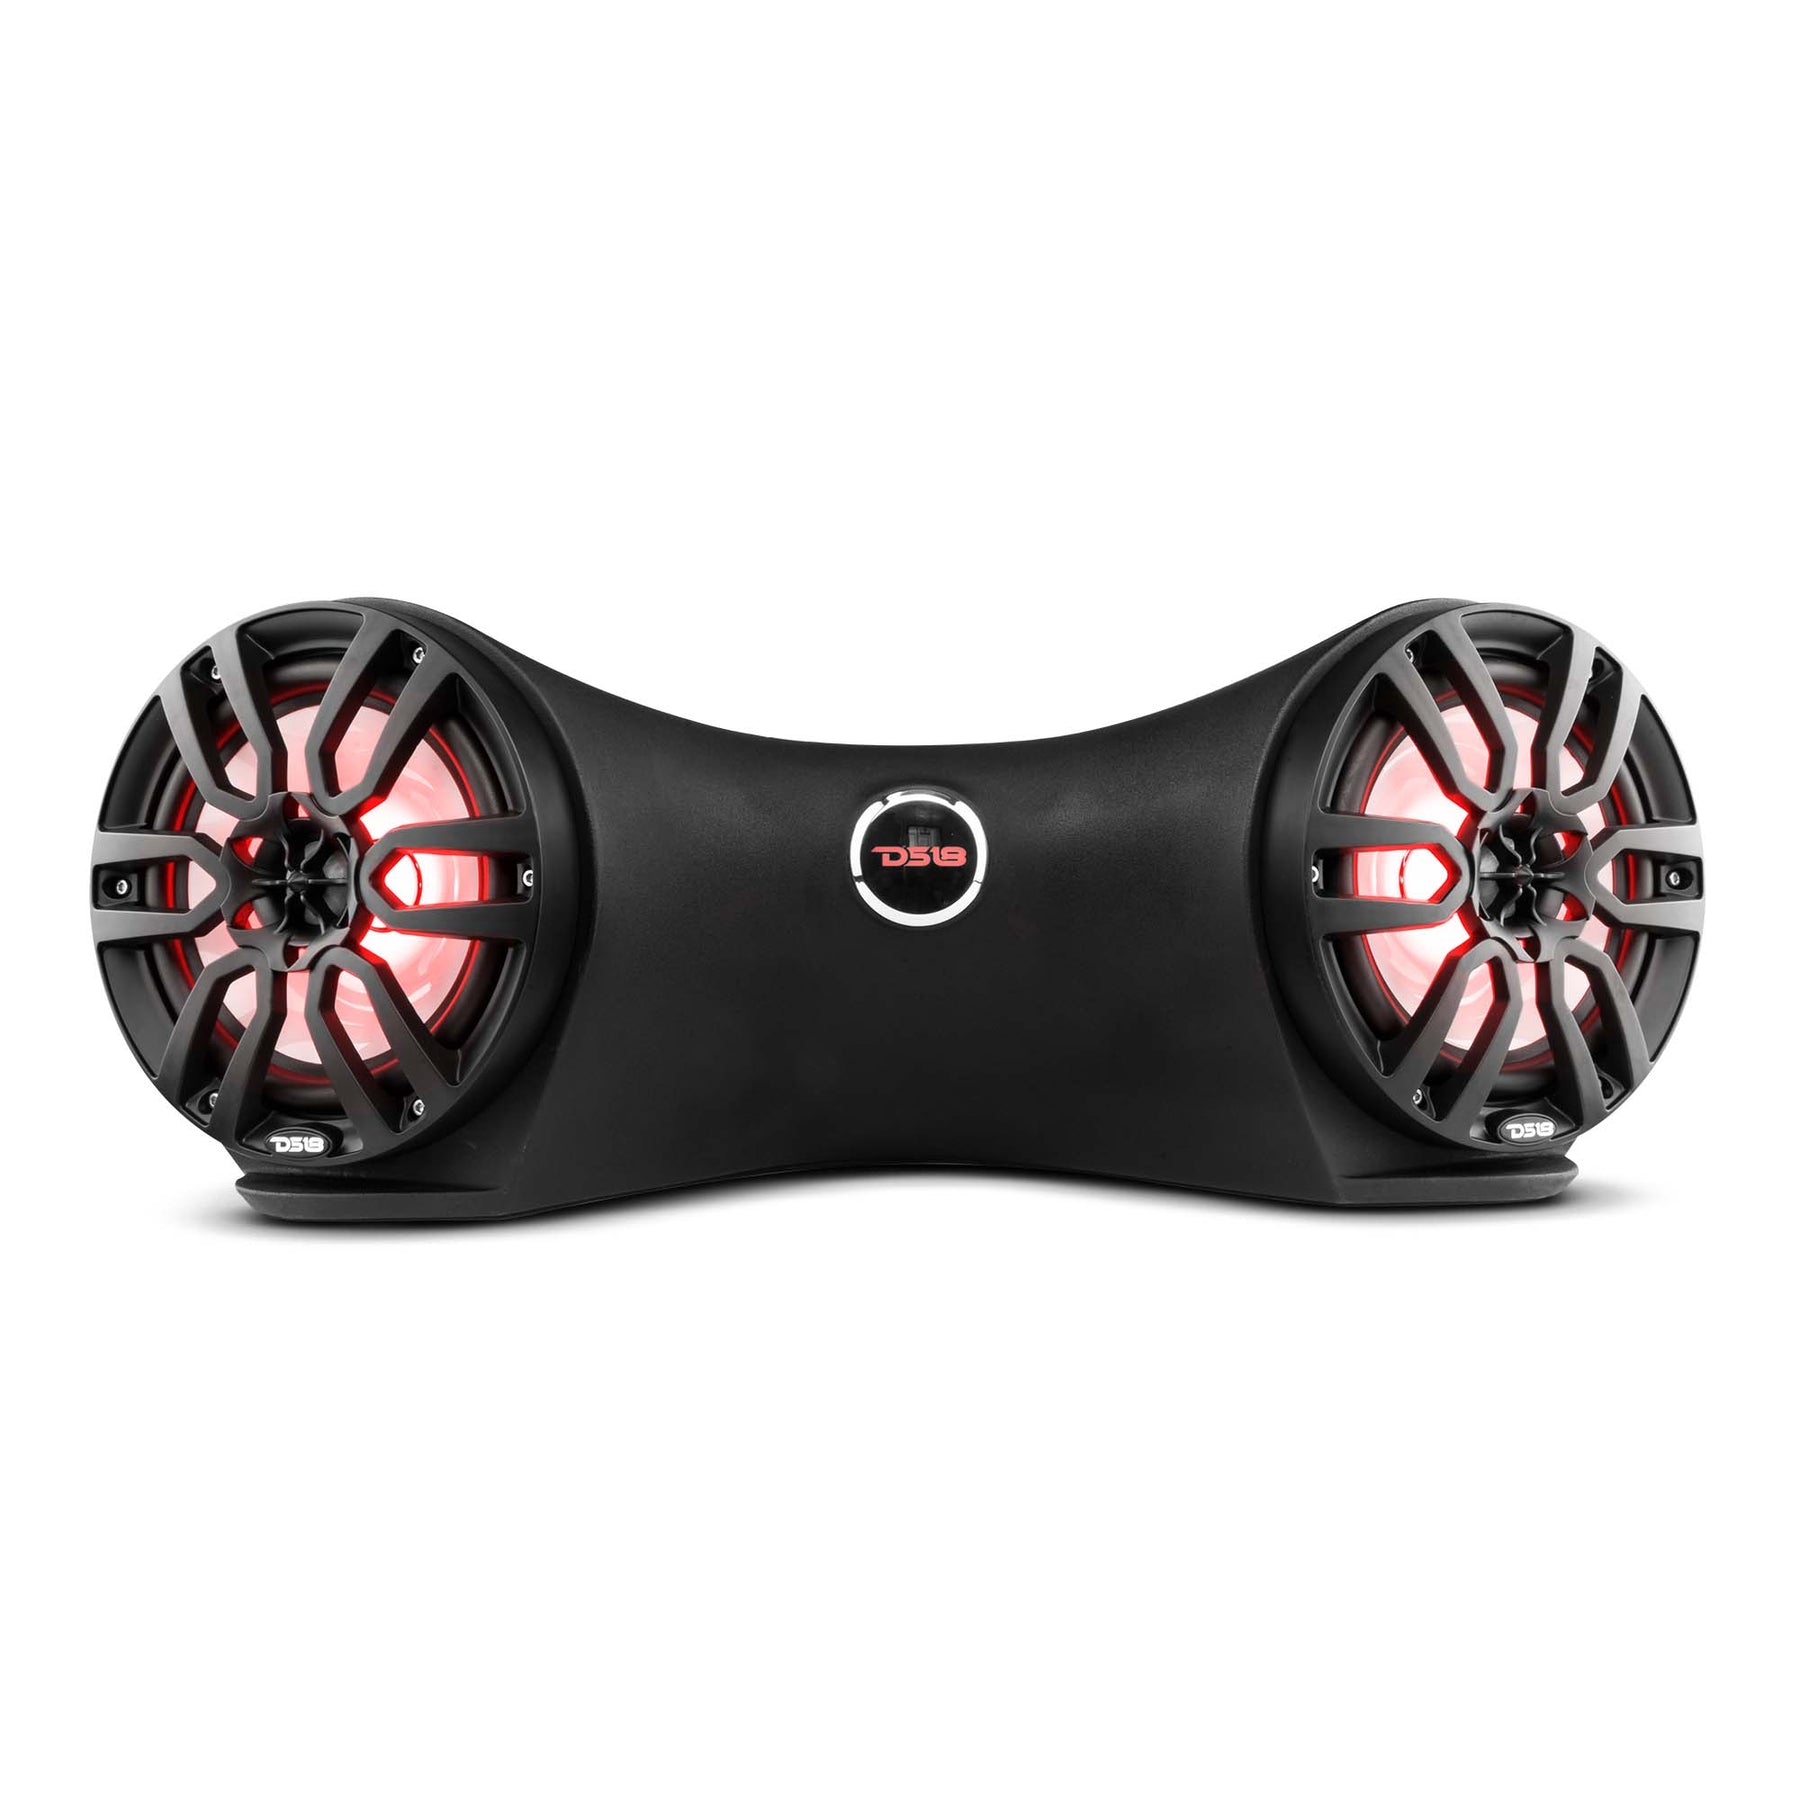 Dual 8" Marine Flat Mount Sound Bar Enclosure with LED RGB Lights 250 Watts Rms (NXL-8BK Included)